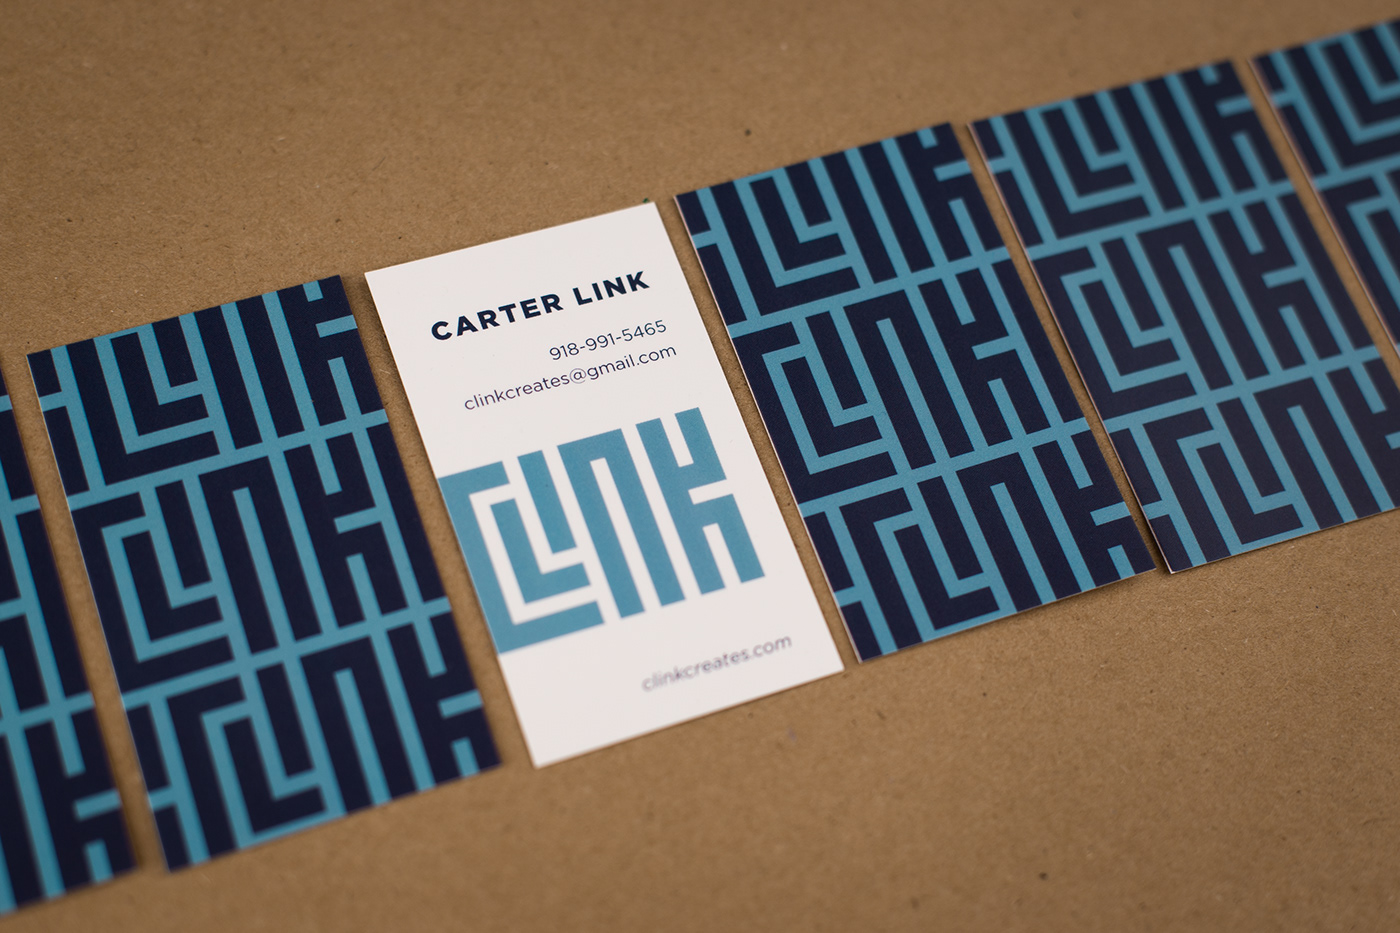 personal branding stationary clink carter Resume cover letter business card stationary package maze pattern